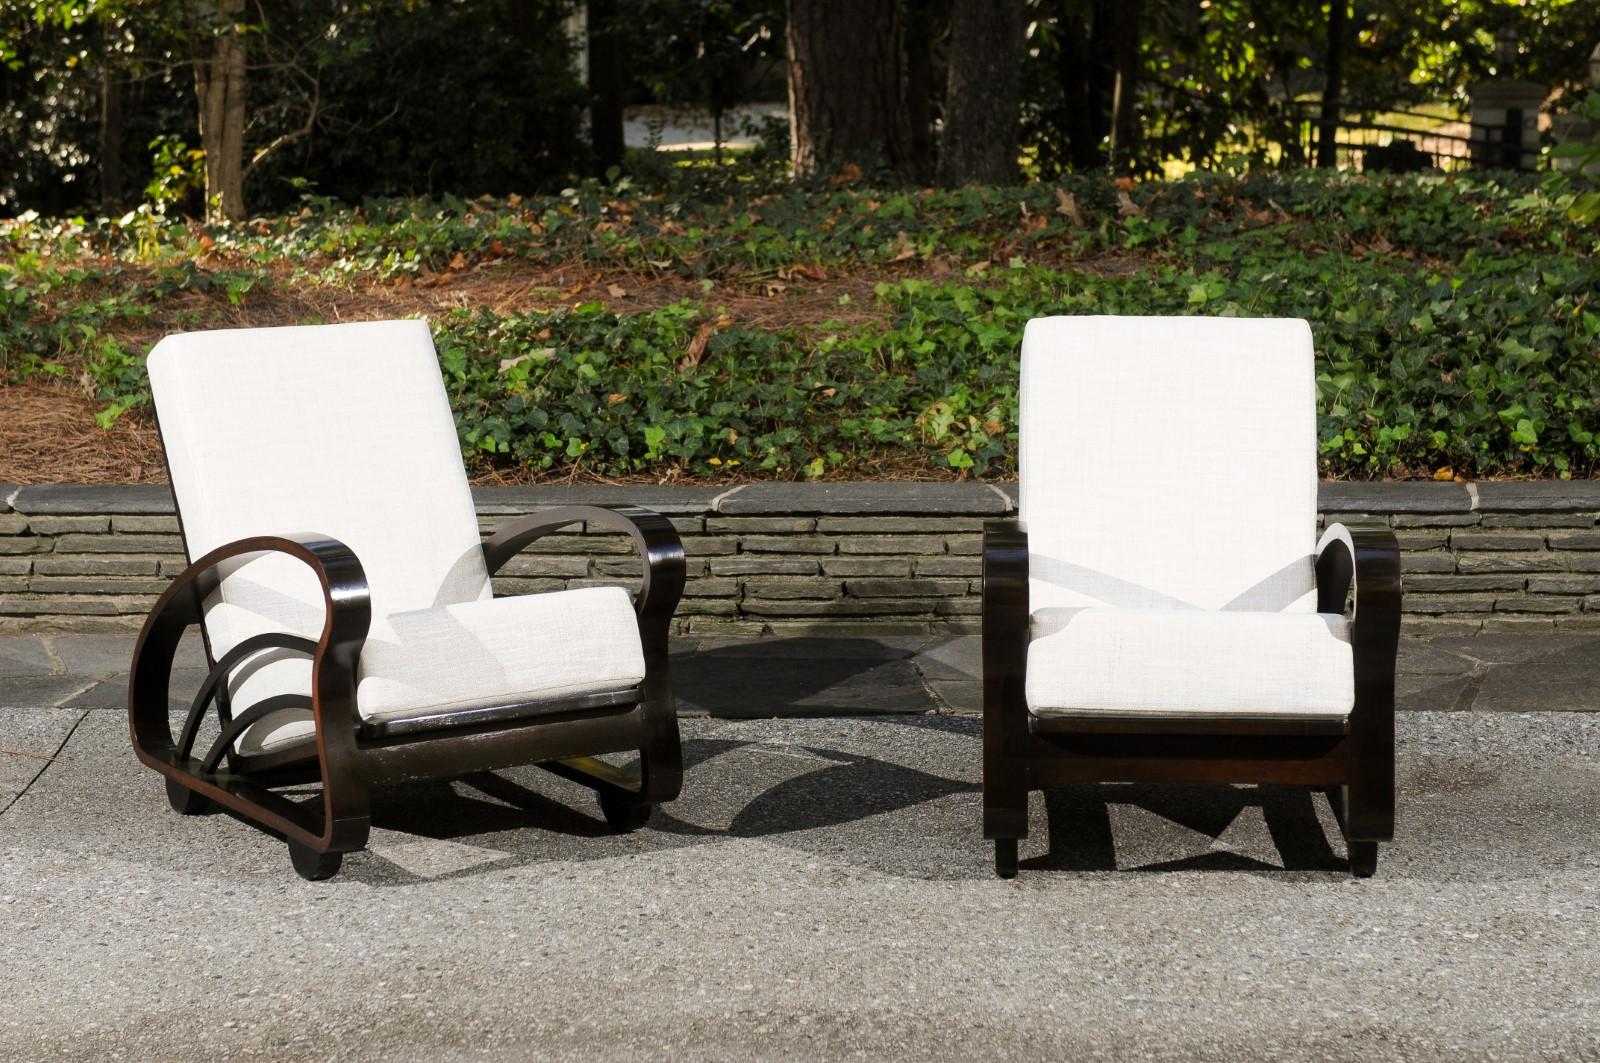 These magnificent lounge chairs are shipped as professionally photographed and described in the listing narrative: Meticulously professionally restored and upholstered. Expert custom upholstery service is available. NOTE: there are two (2) pair of